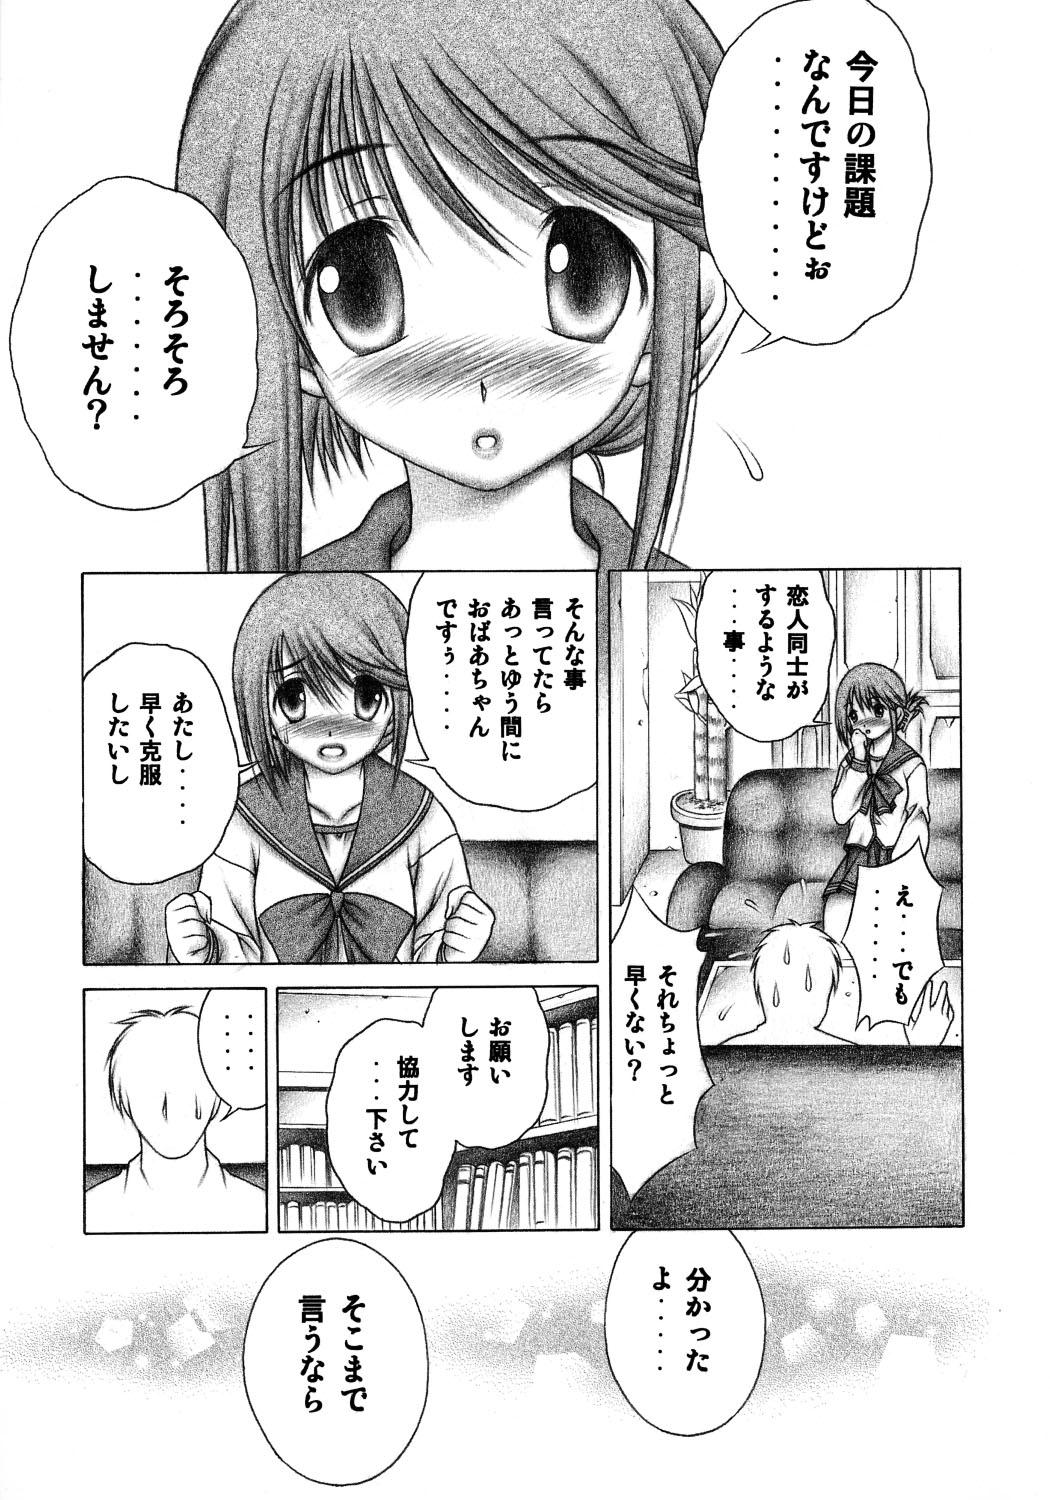 Maid Manaka - Toheart2 Sex Toy - Page 4